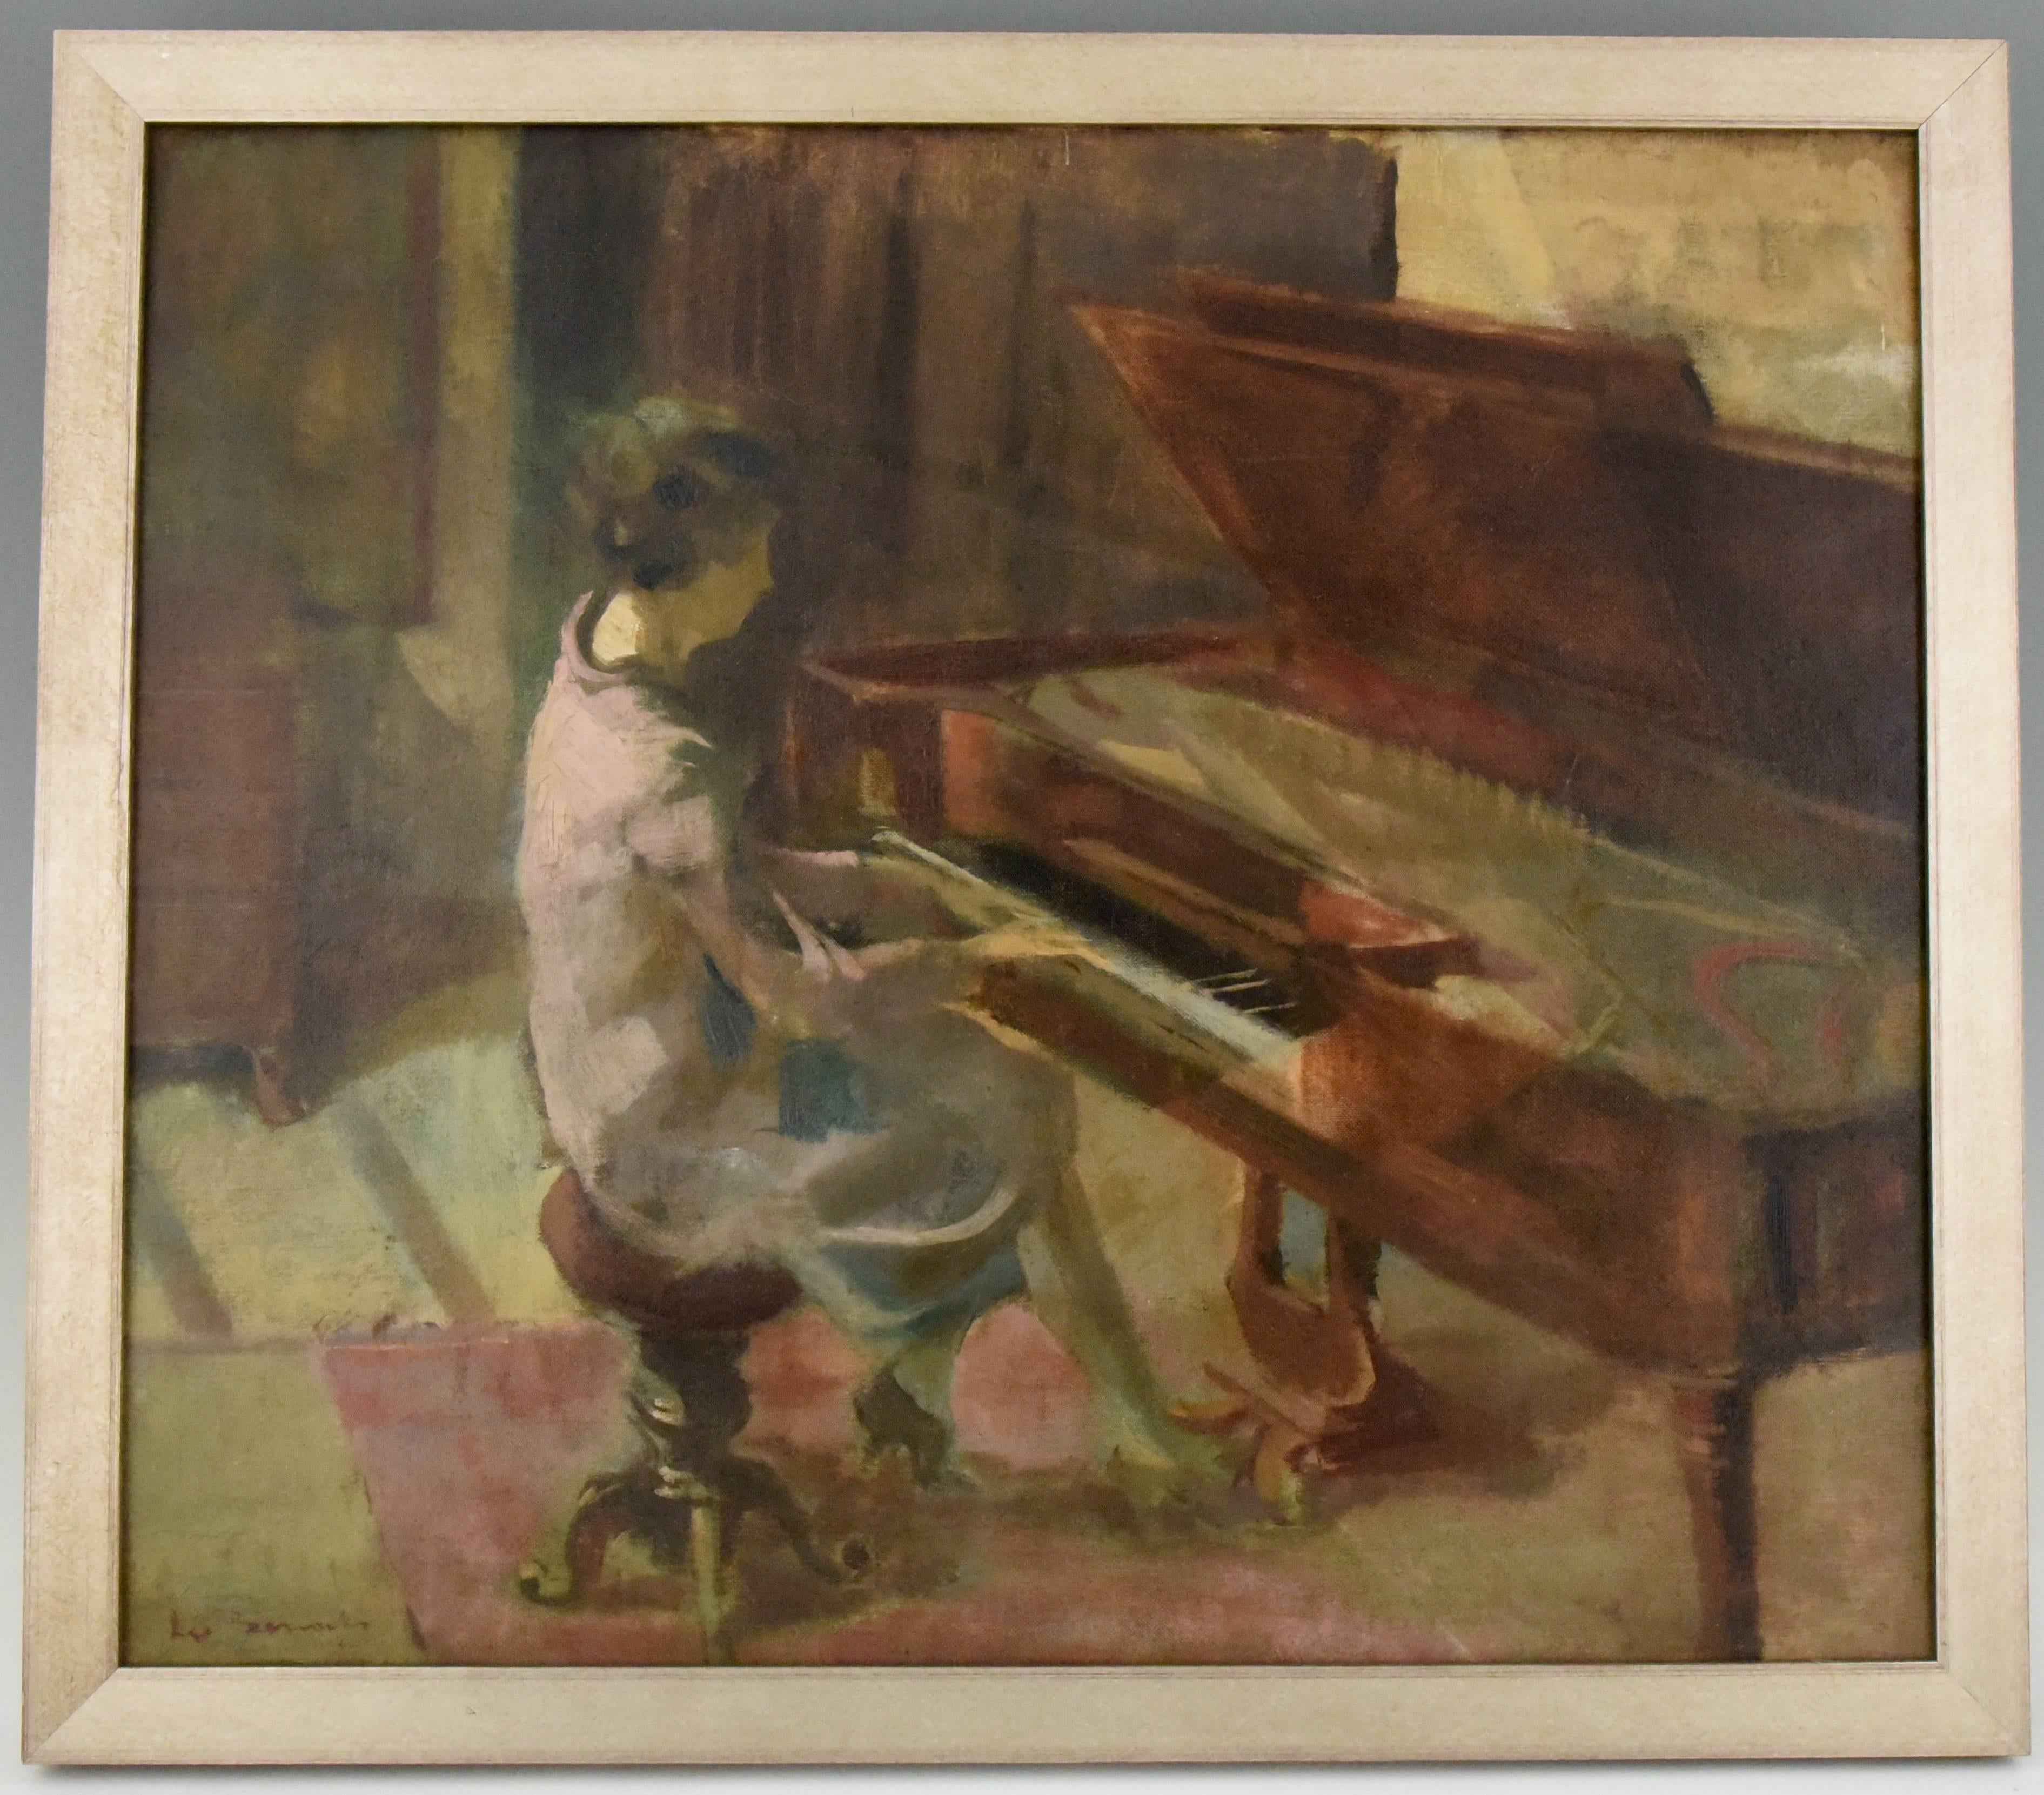 Very nice subject for this Art Deco painting of a woman at the piano. The warm colors are typical for the work of Leo Bervoets, a Belgian artist. The work is on canvas and has a contempoarary frame. 

Signature/ Marks: Leo Bervoets
Style: